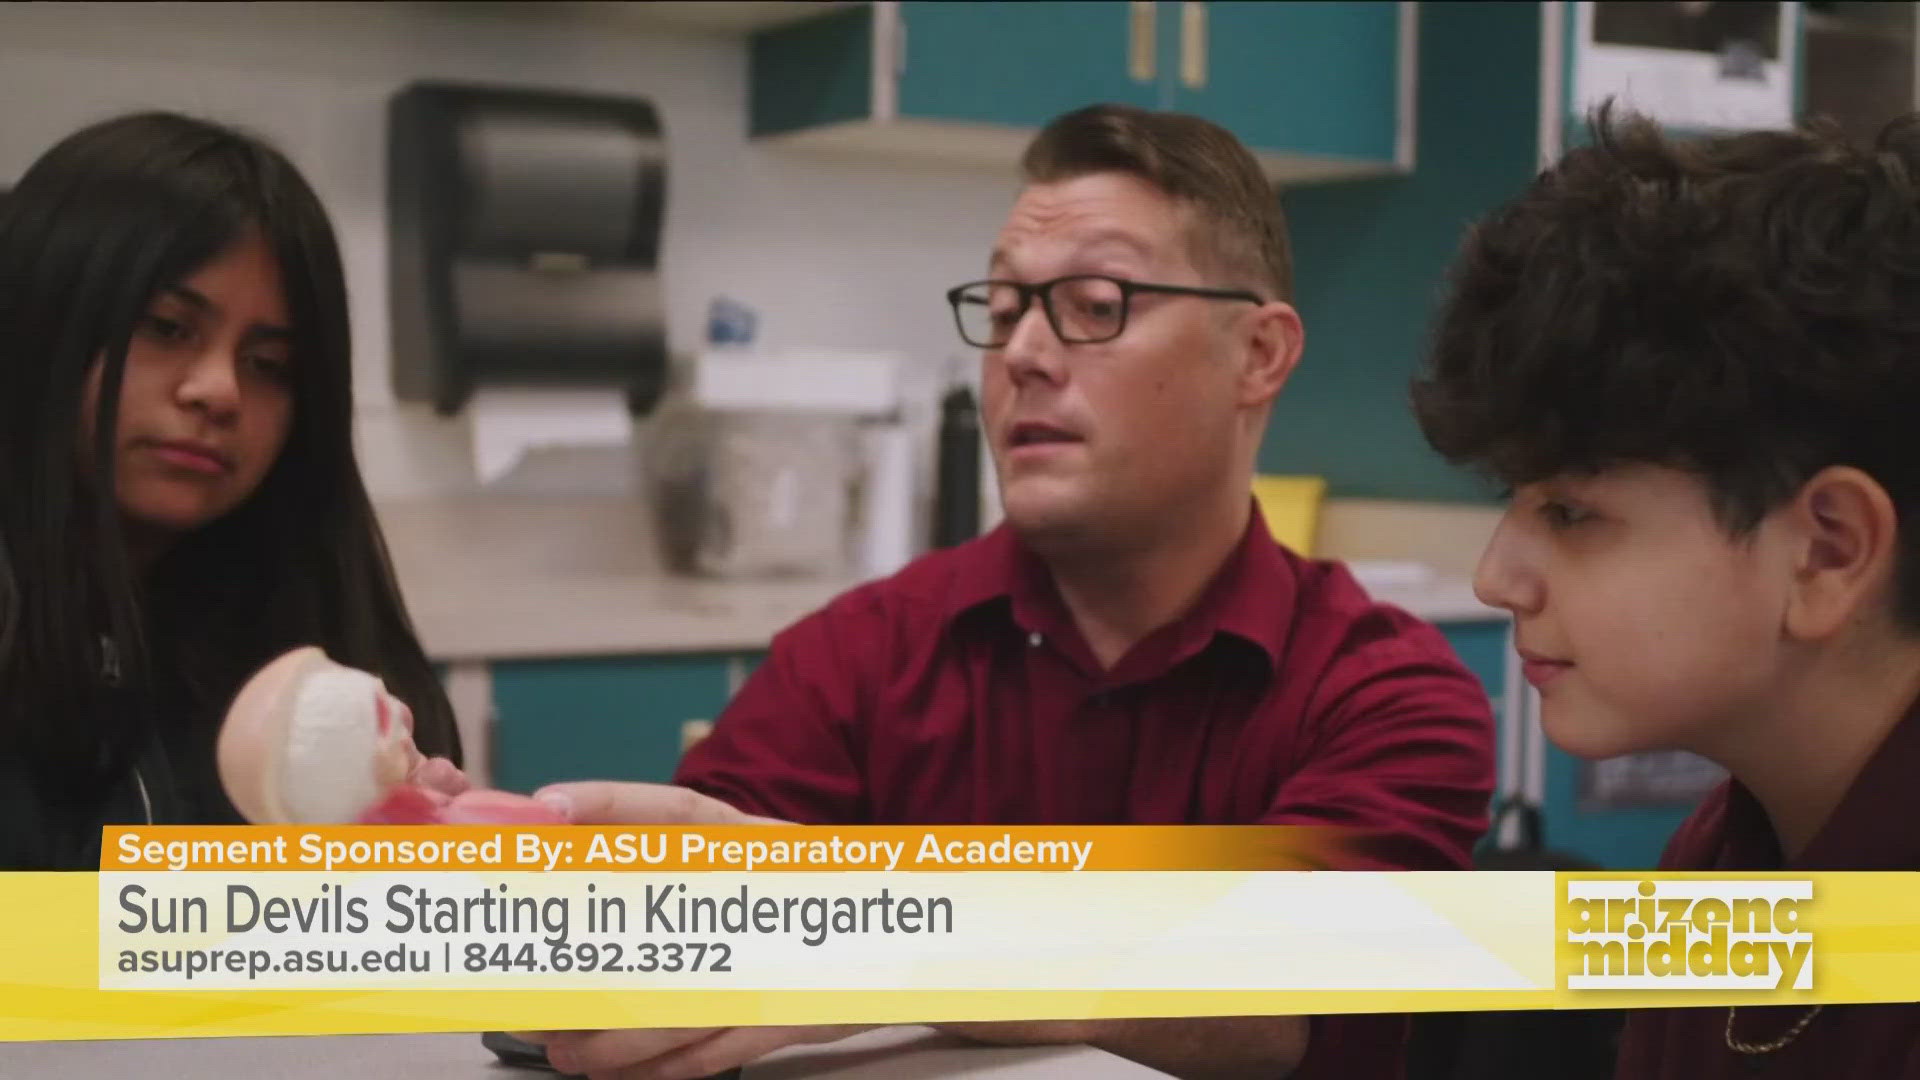 Dr. Betsy Fowler, Head of Schools at ASU Preparatory Academy, tells us how the academy impacts students and shares how to get your child started.